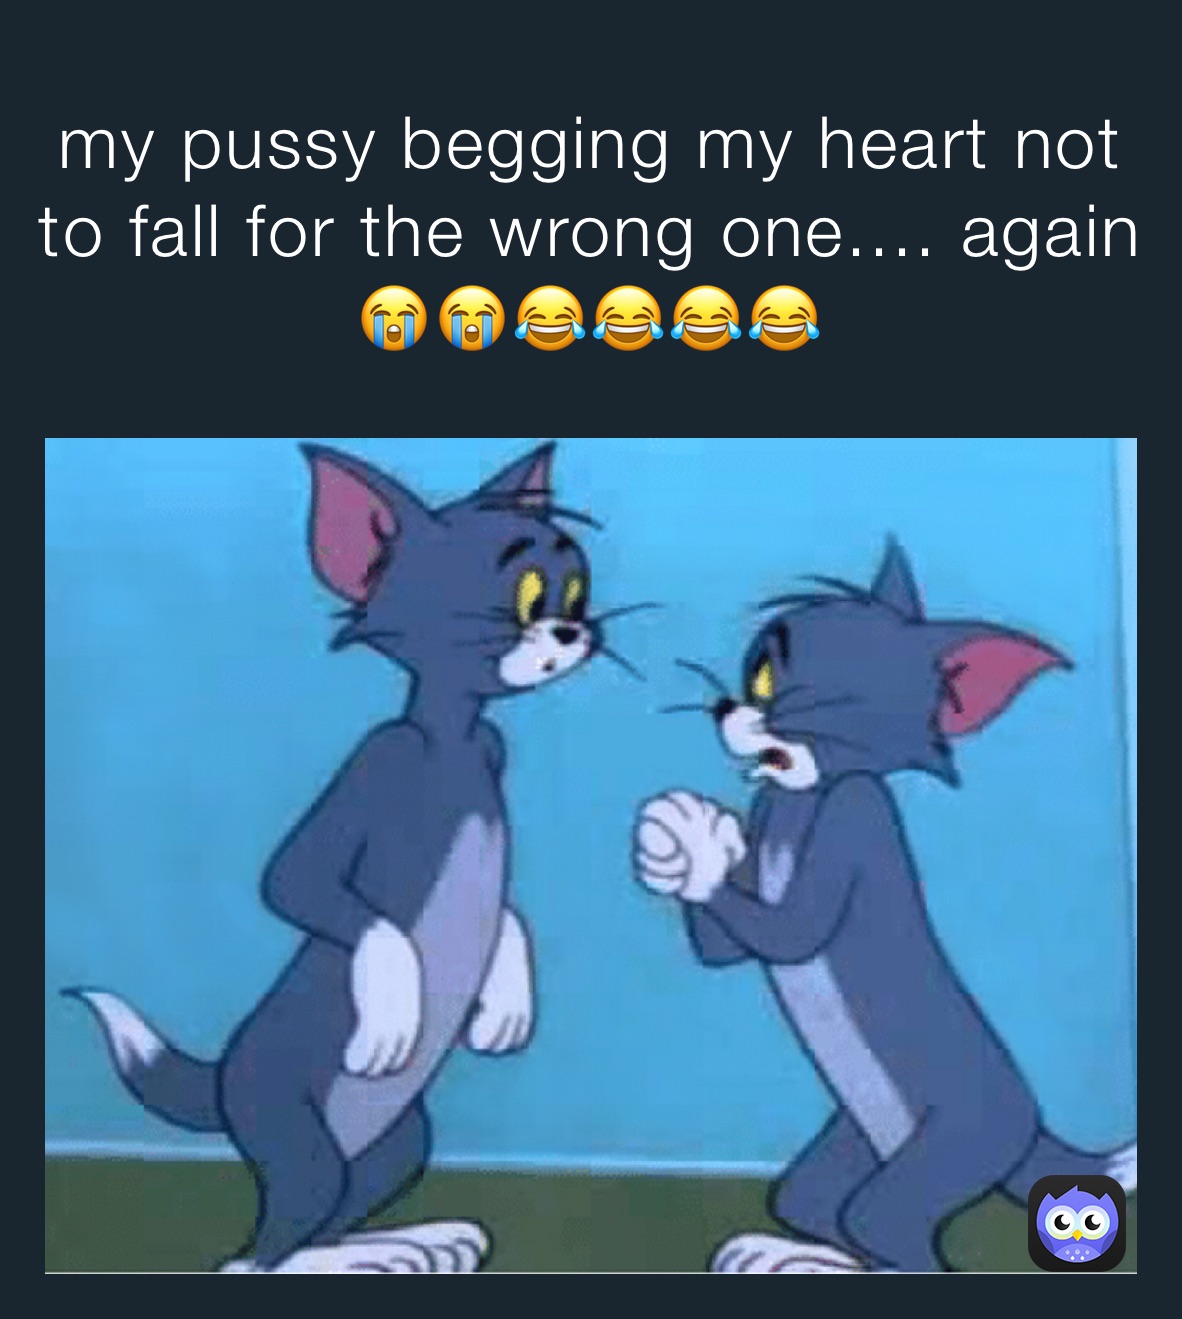 my pussy begging my heart not to fall for the wrong one.... again 😭😭😂😂😂😂